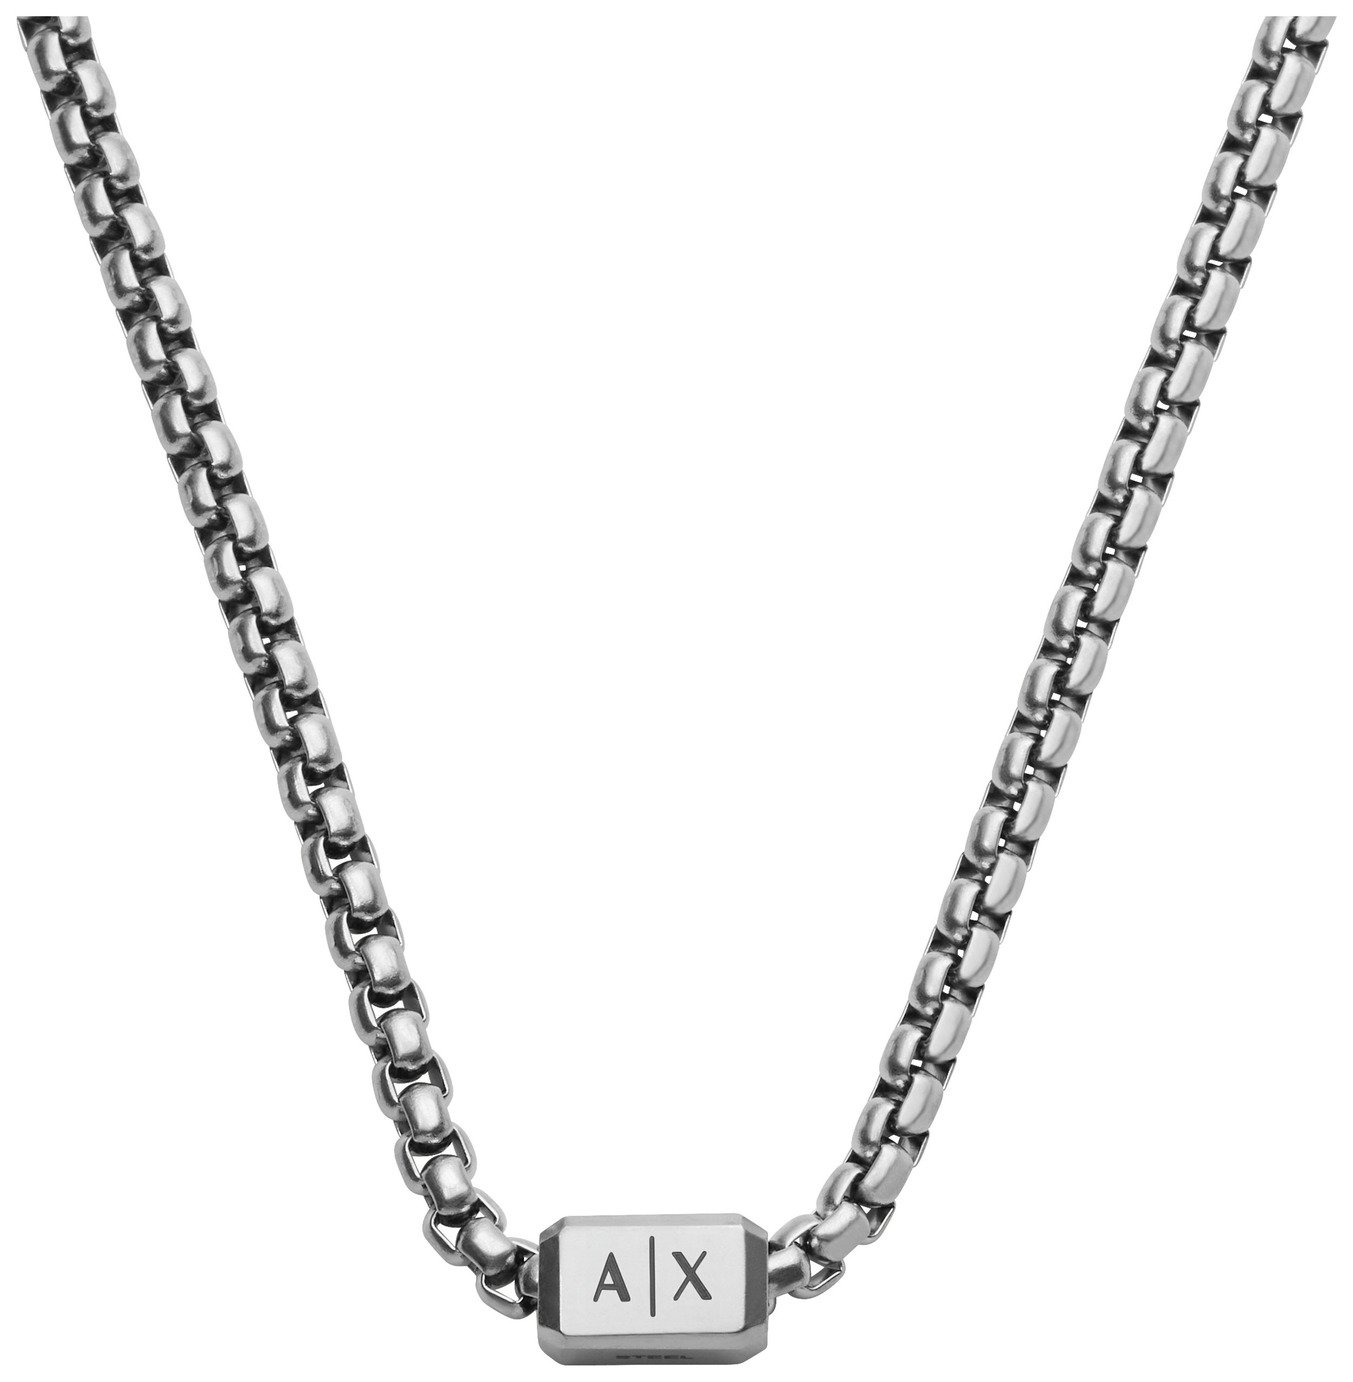 Armani Exchange Men's Silver Stainless Steel Chain Necklace